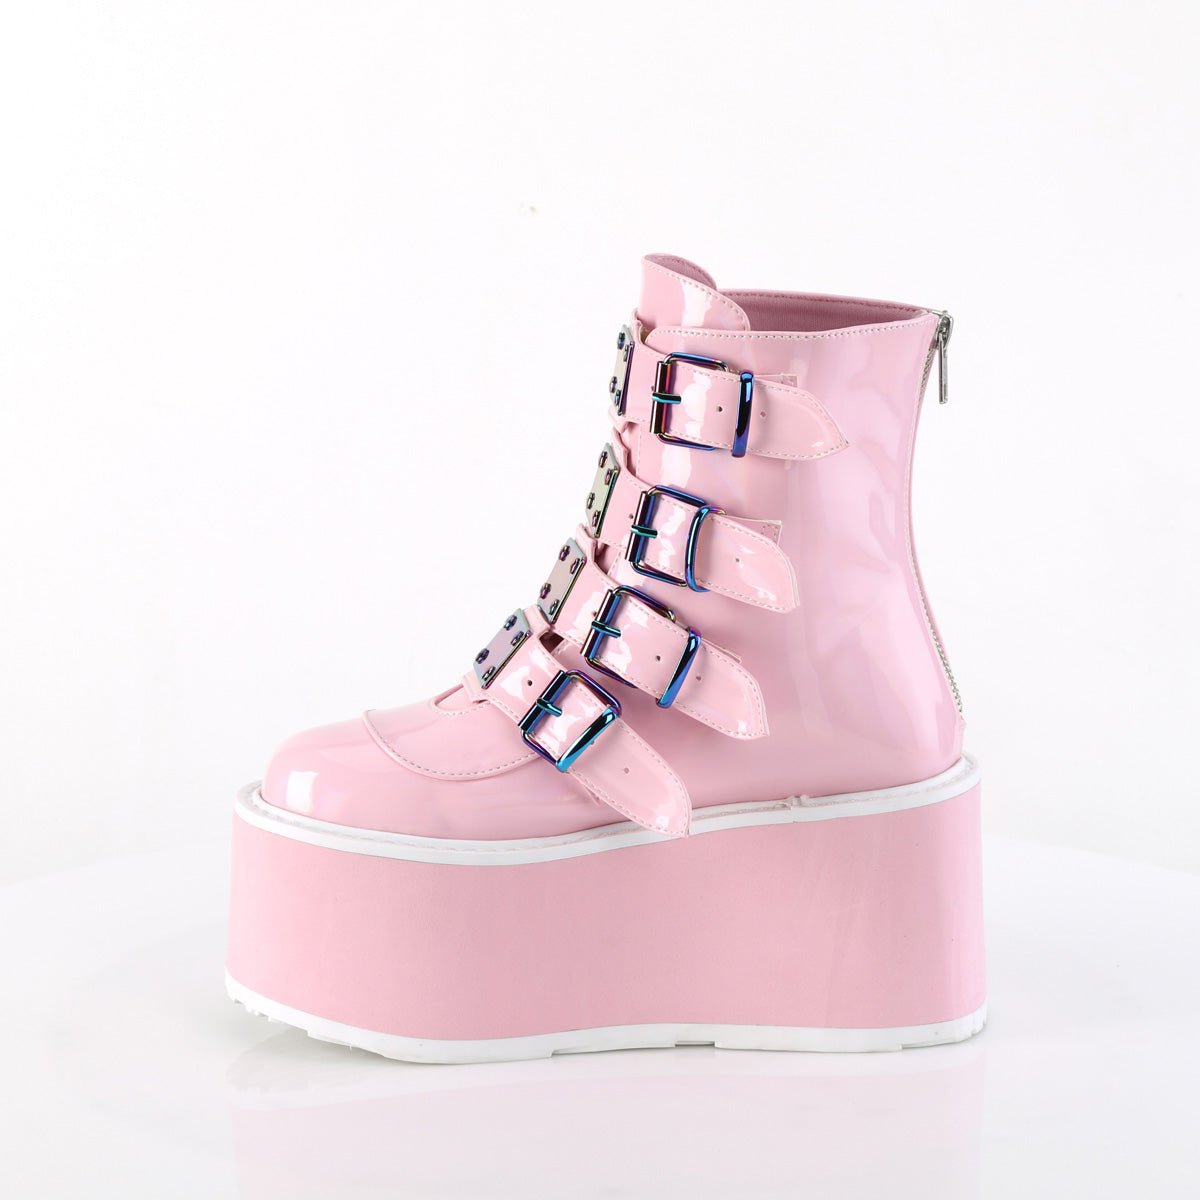 Too Fast | Demonia Damned 105 | Baby Pink Hologram Patent Women&#39;s Ankle Boots